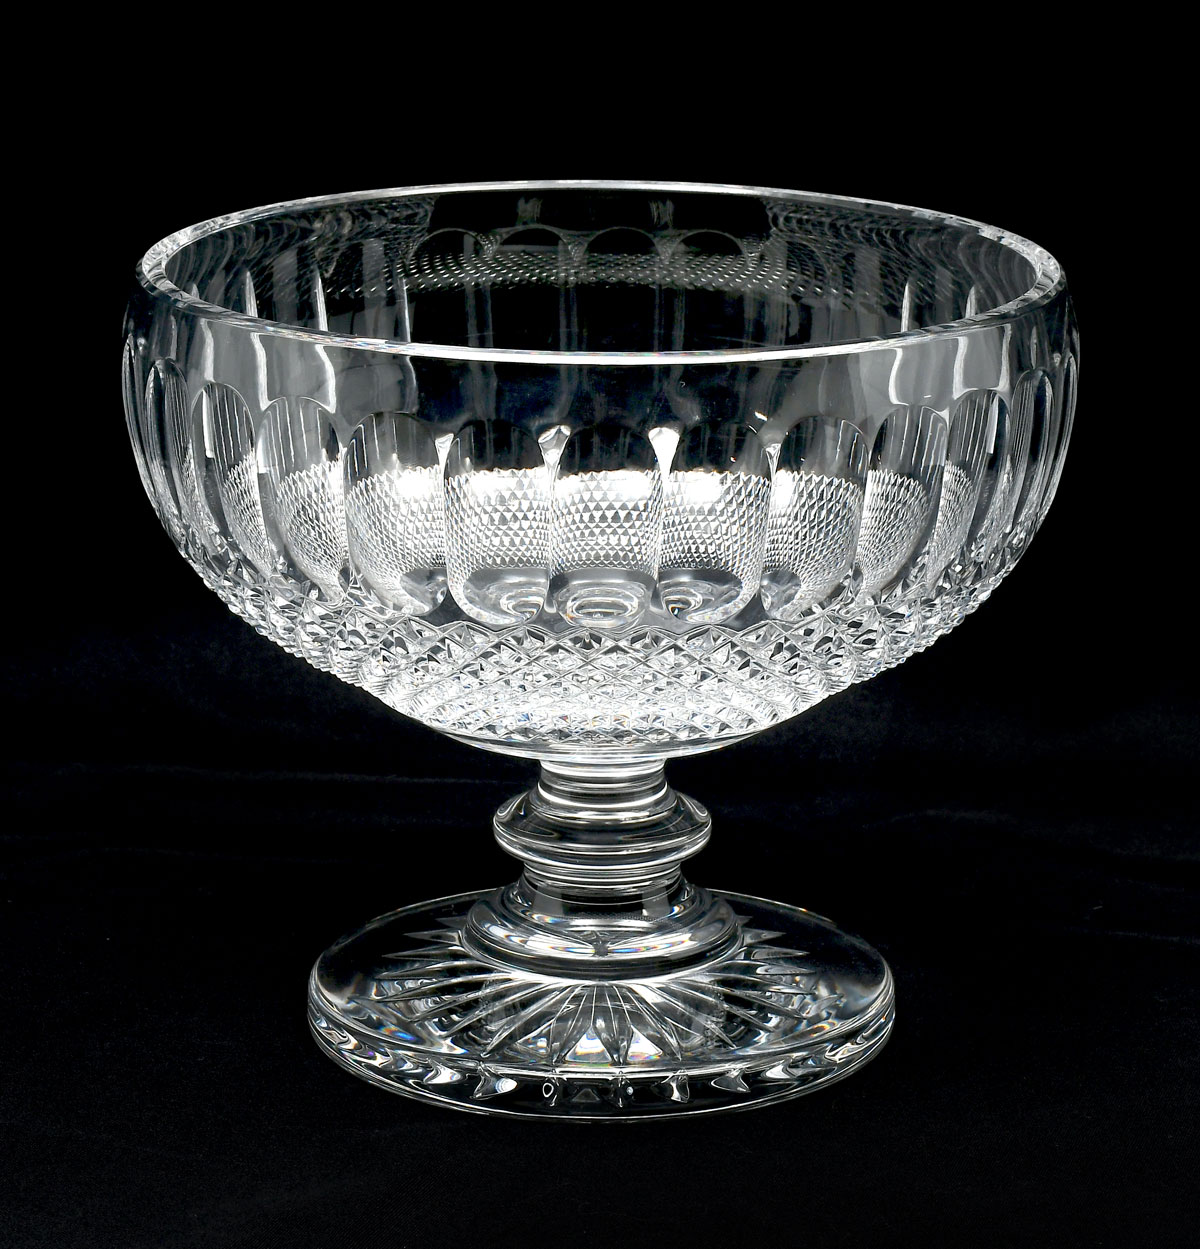 WATERFORD PUNCH BOWL: Waterford crystal